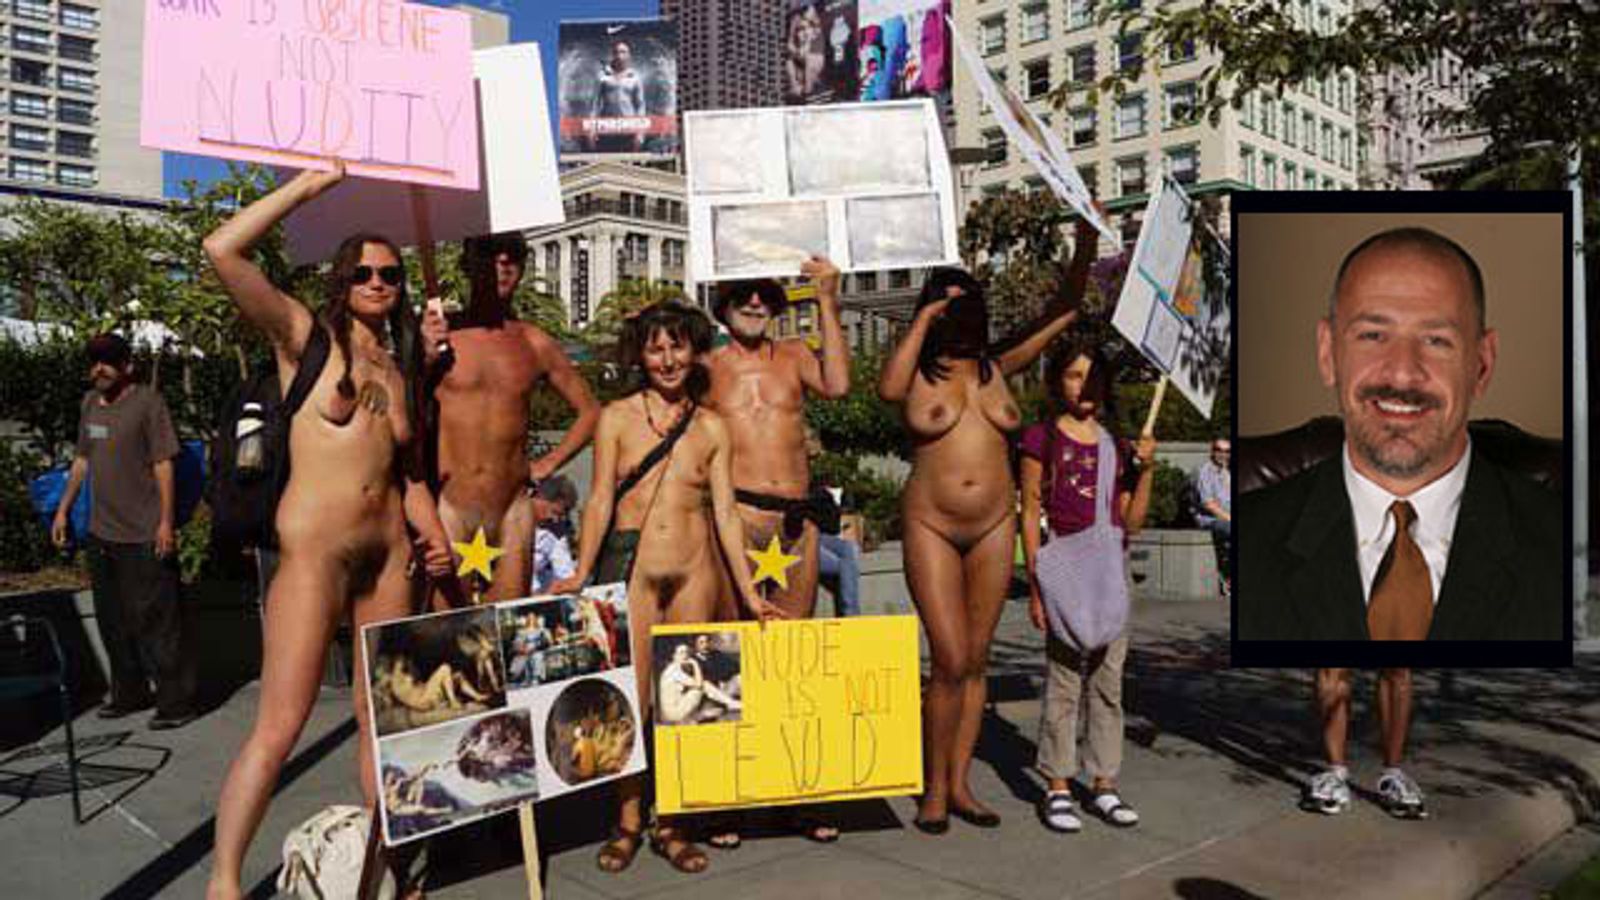 City of San Francisco Settles Part of Claims by Nudism Activists